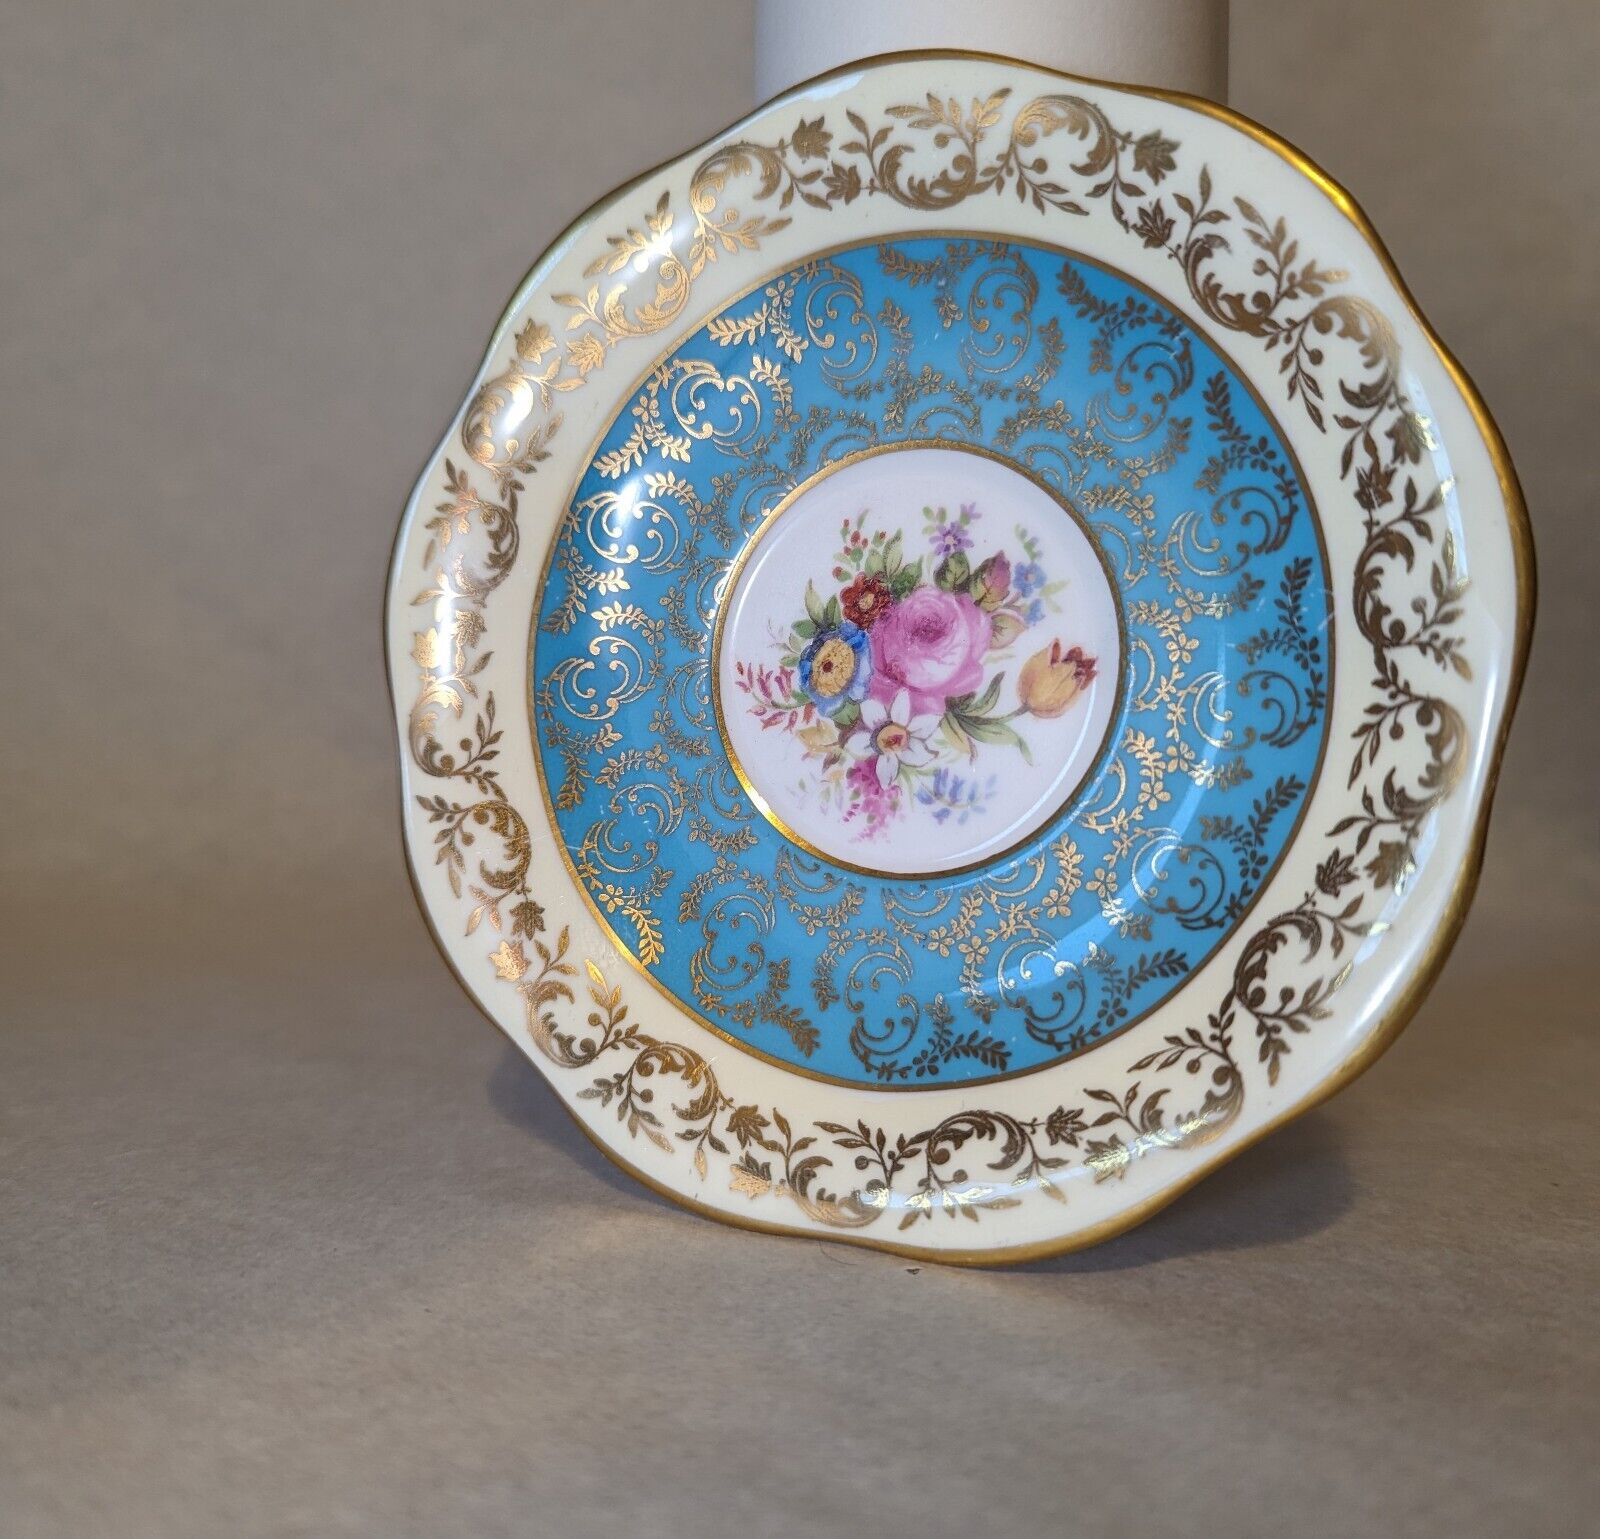 Foley Bone china, cream/turquoise/white/gold/floral saucer